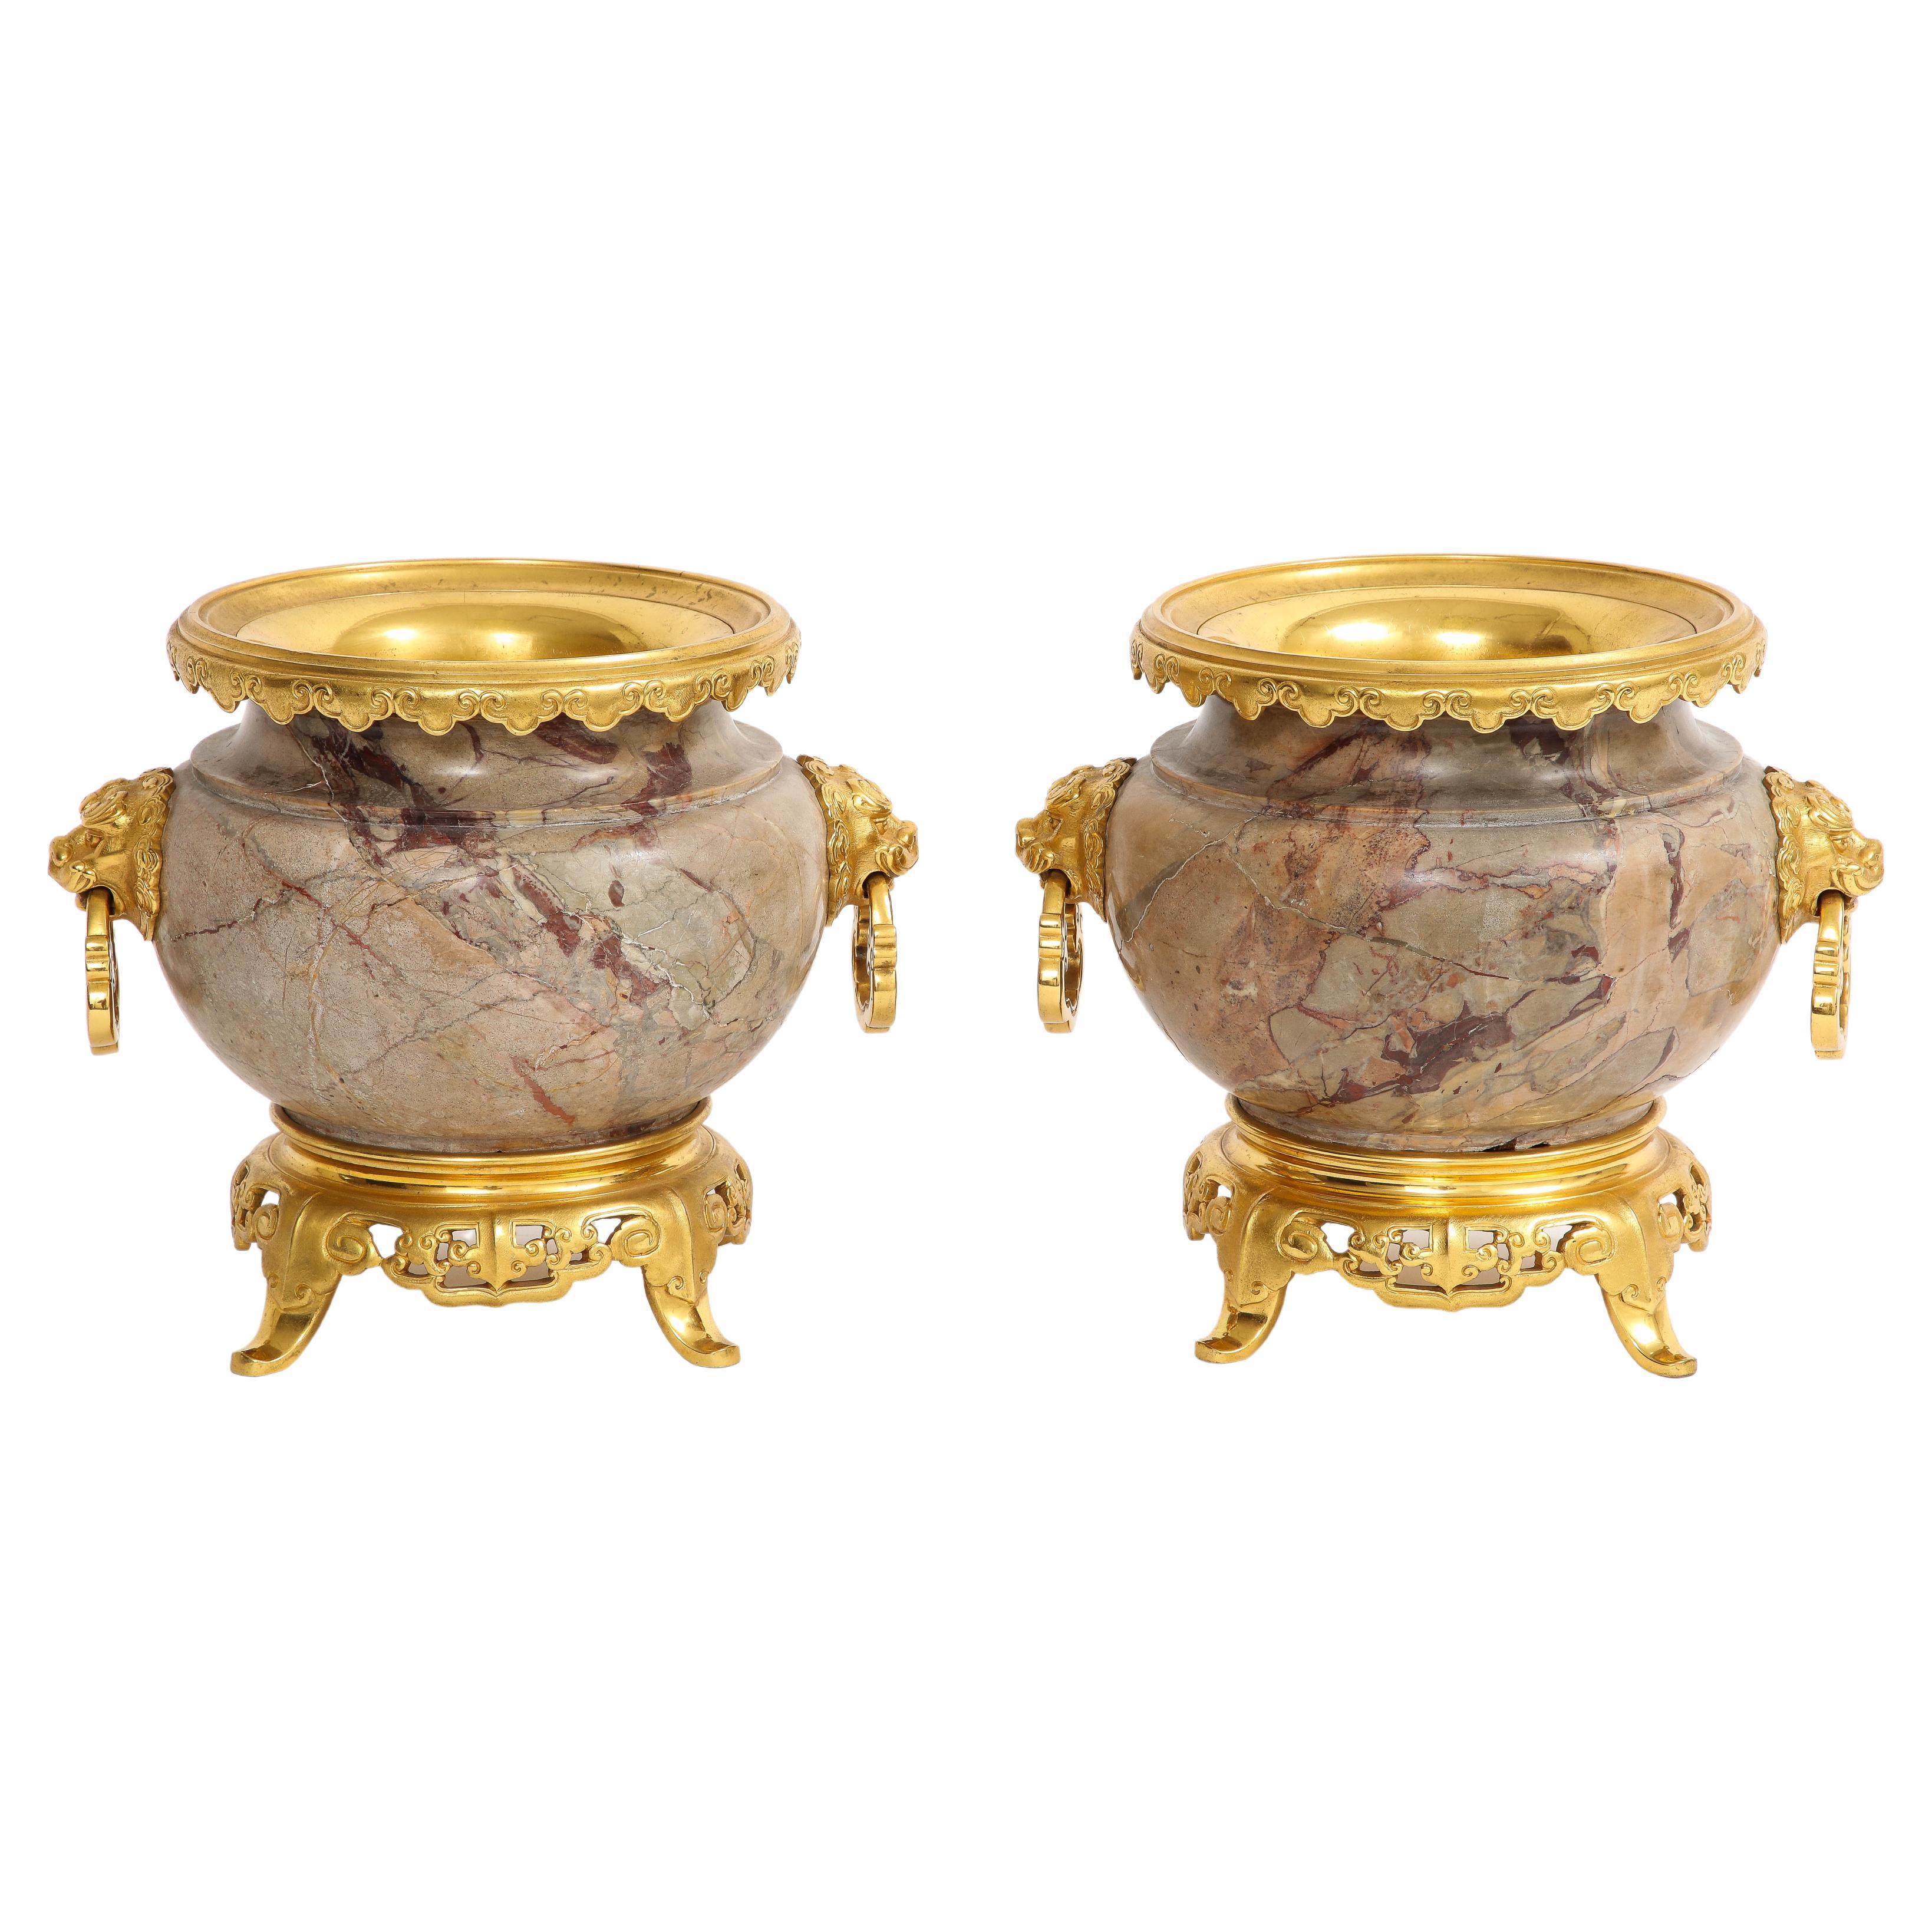 Pair of 19th Century French Ormolu Mounted Marble Centerpieces, H. Journet & Cie